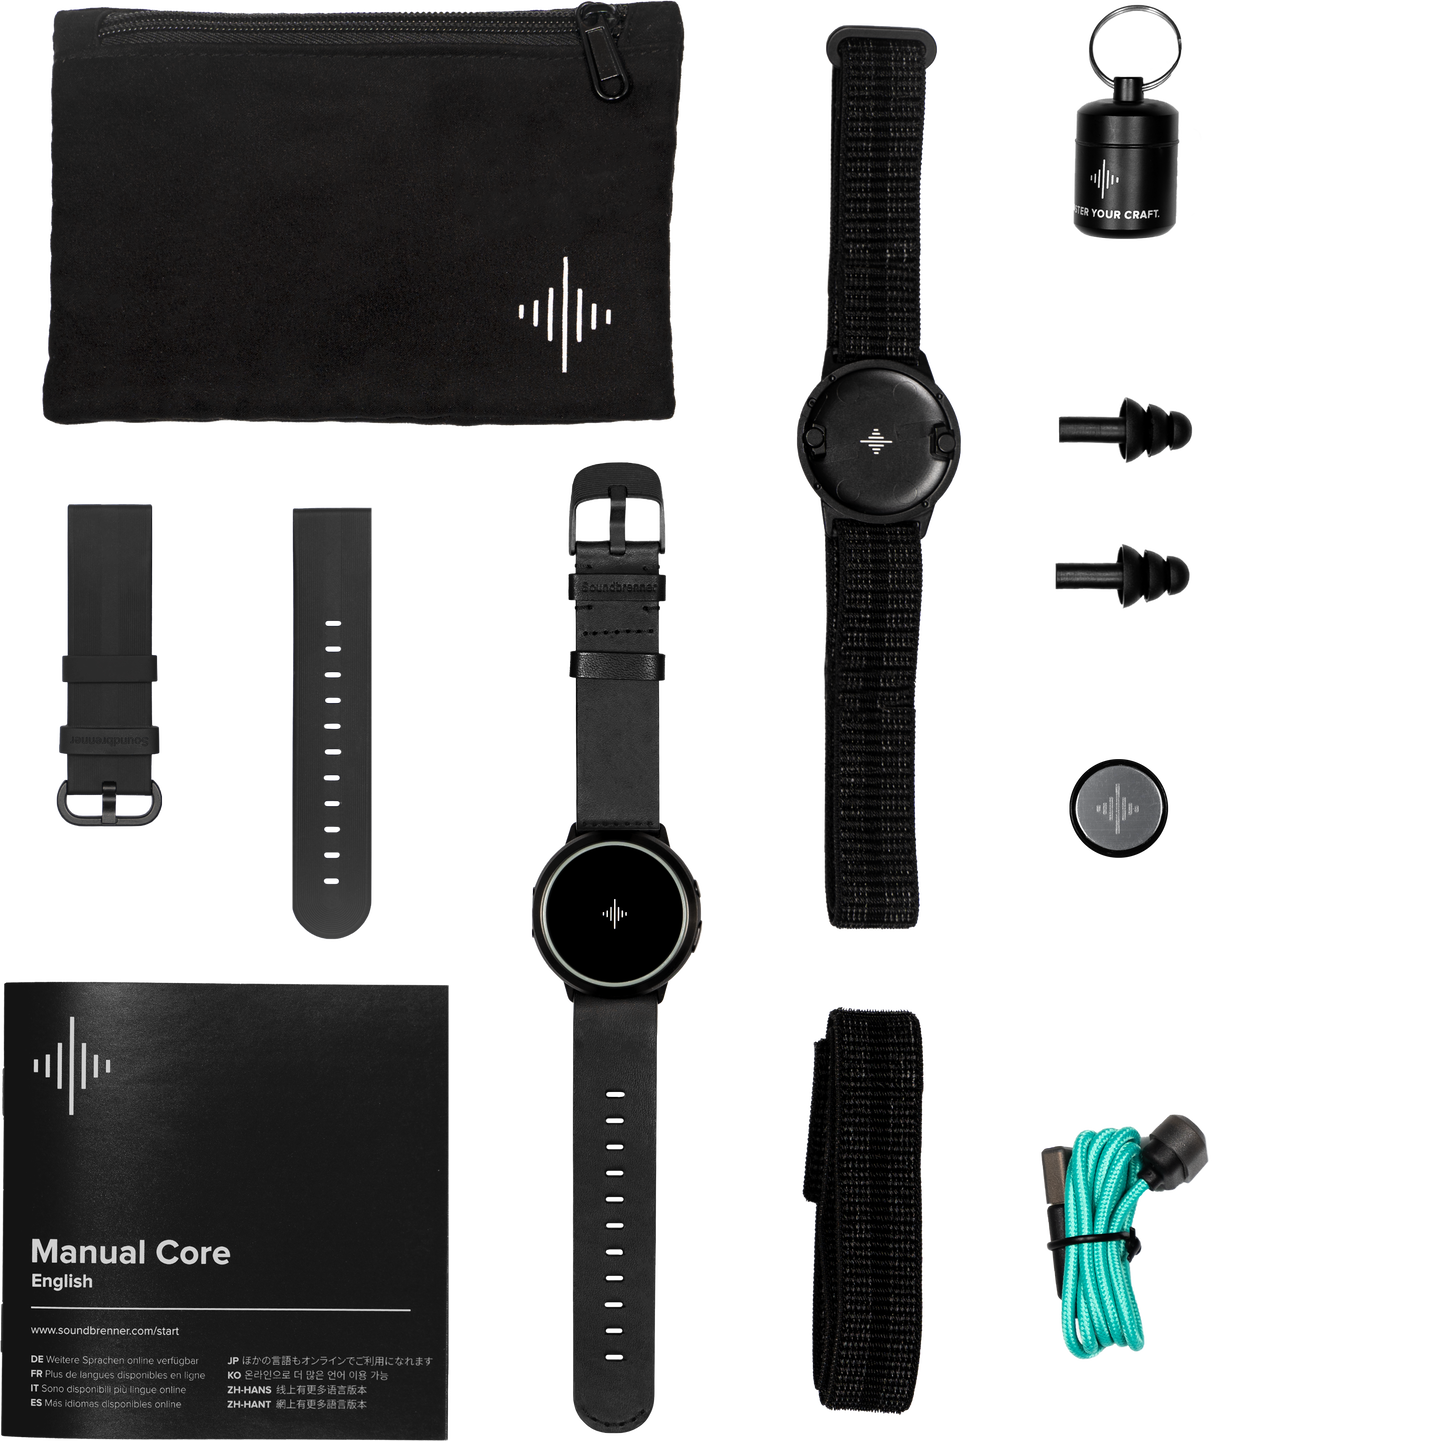 Soundbrenner Core Steel -  The Wearable Vibrating metronome, Chromatic contact tuner, Decibel meter and Smartwatch